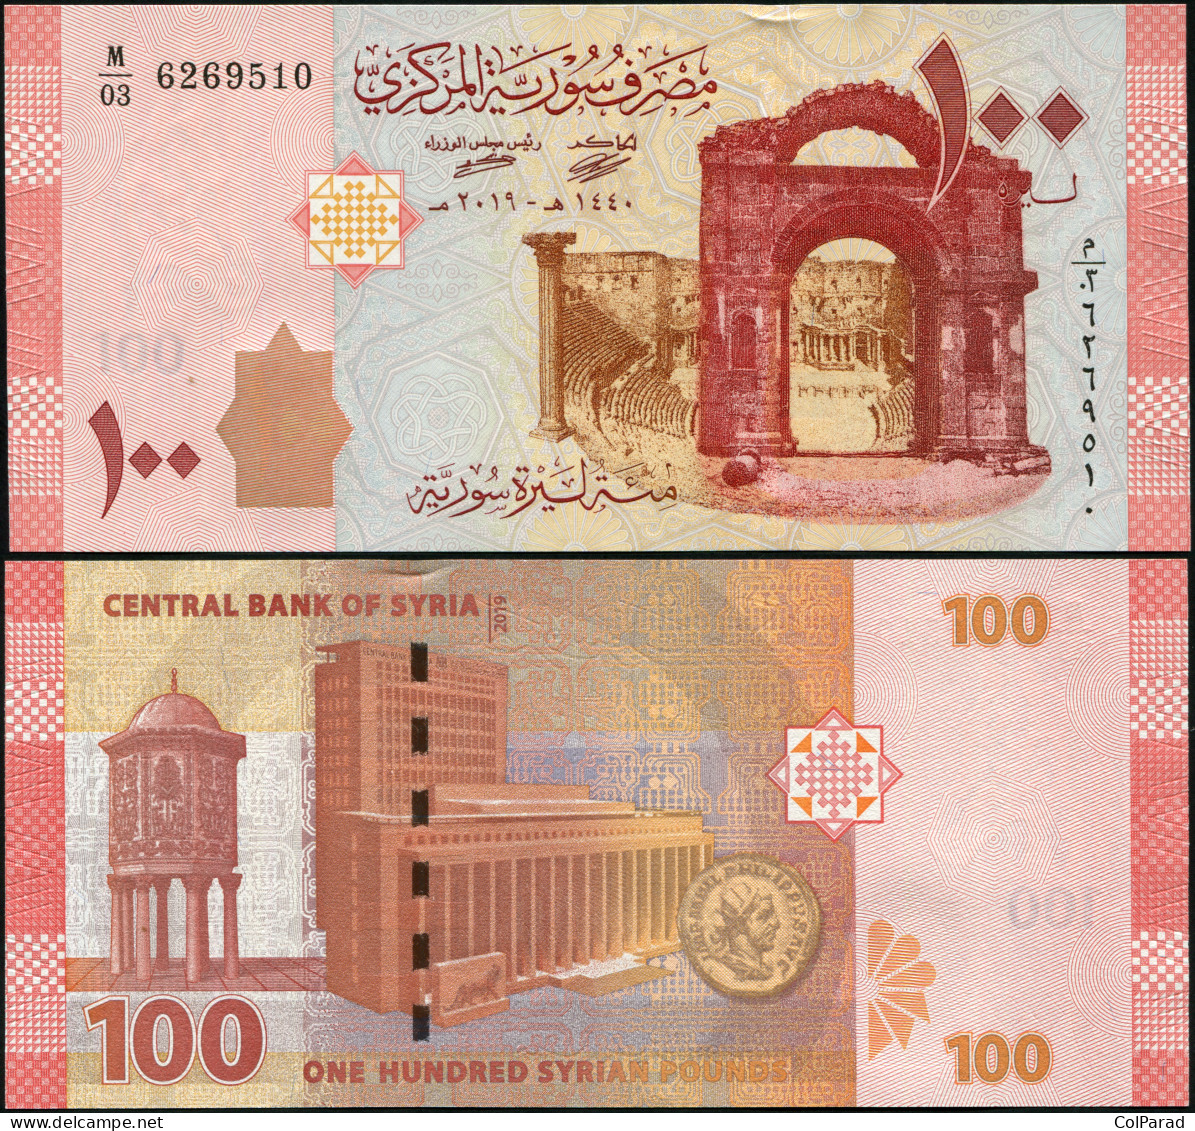 SYRIA 100 SYRIAN POUNDS - 2019 - Paper Unc - P.NL Banknote - Syria